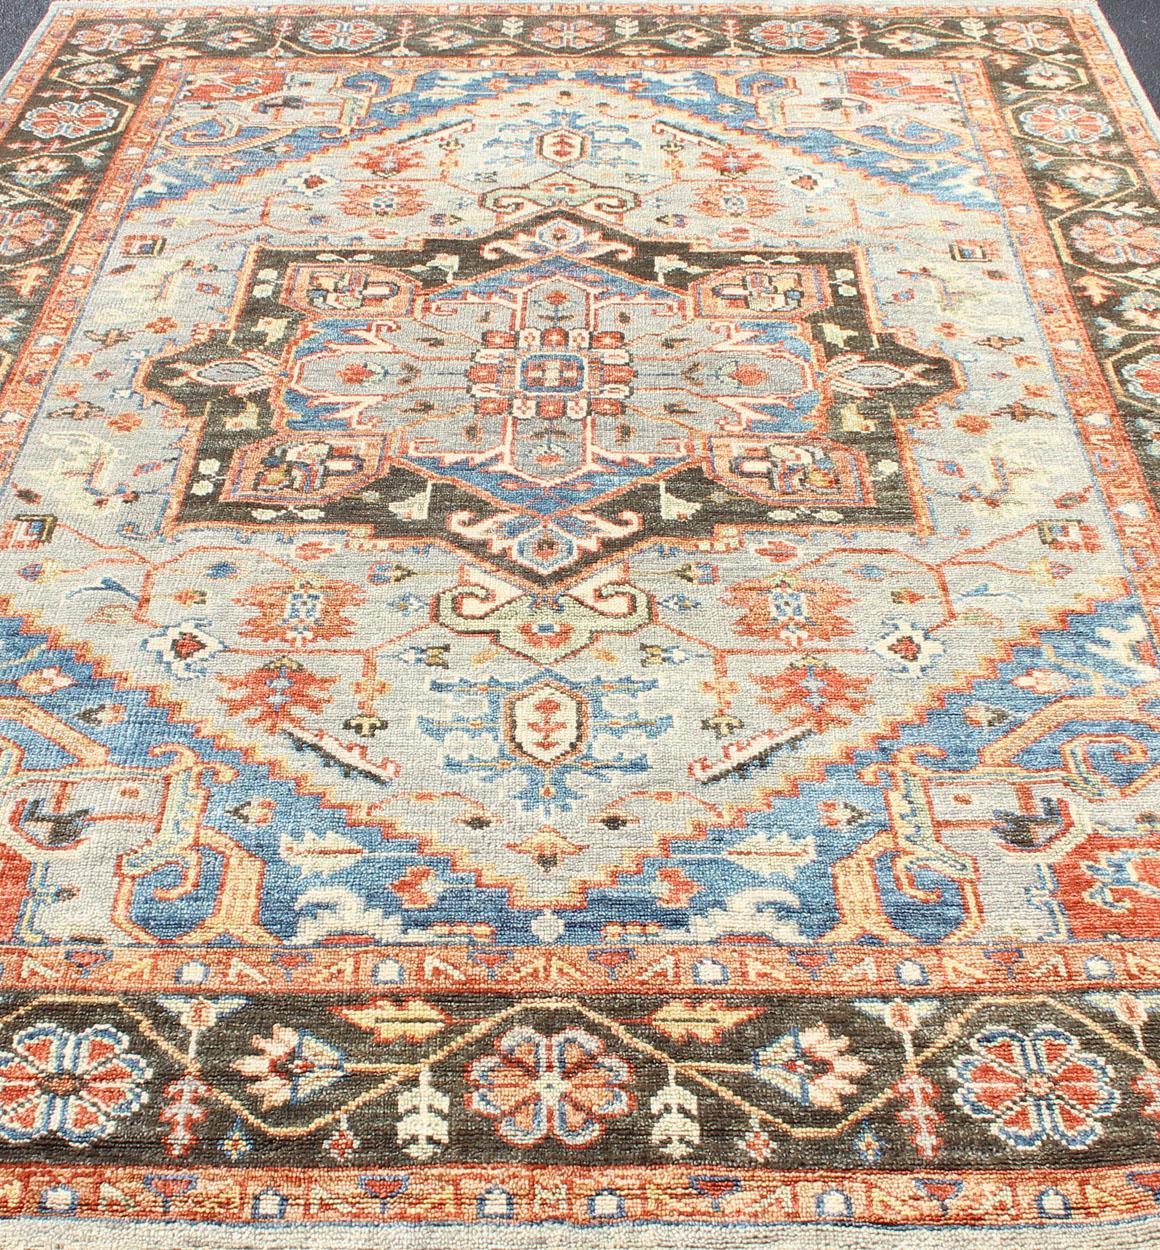 Hand-Knotted Heriz by Keivan Woven Arts in Brown, Ice Blue, Royal Blue & Red

Measures 8'6 x 11'10

This modern day Heriz rug was hand-knotted in India by Keivan Woven Arts, during the 2010's. The brown/cocoa colored border displays a repeating